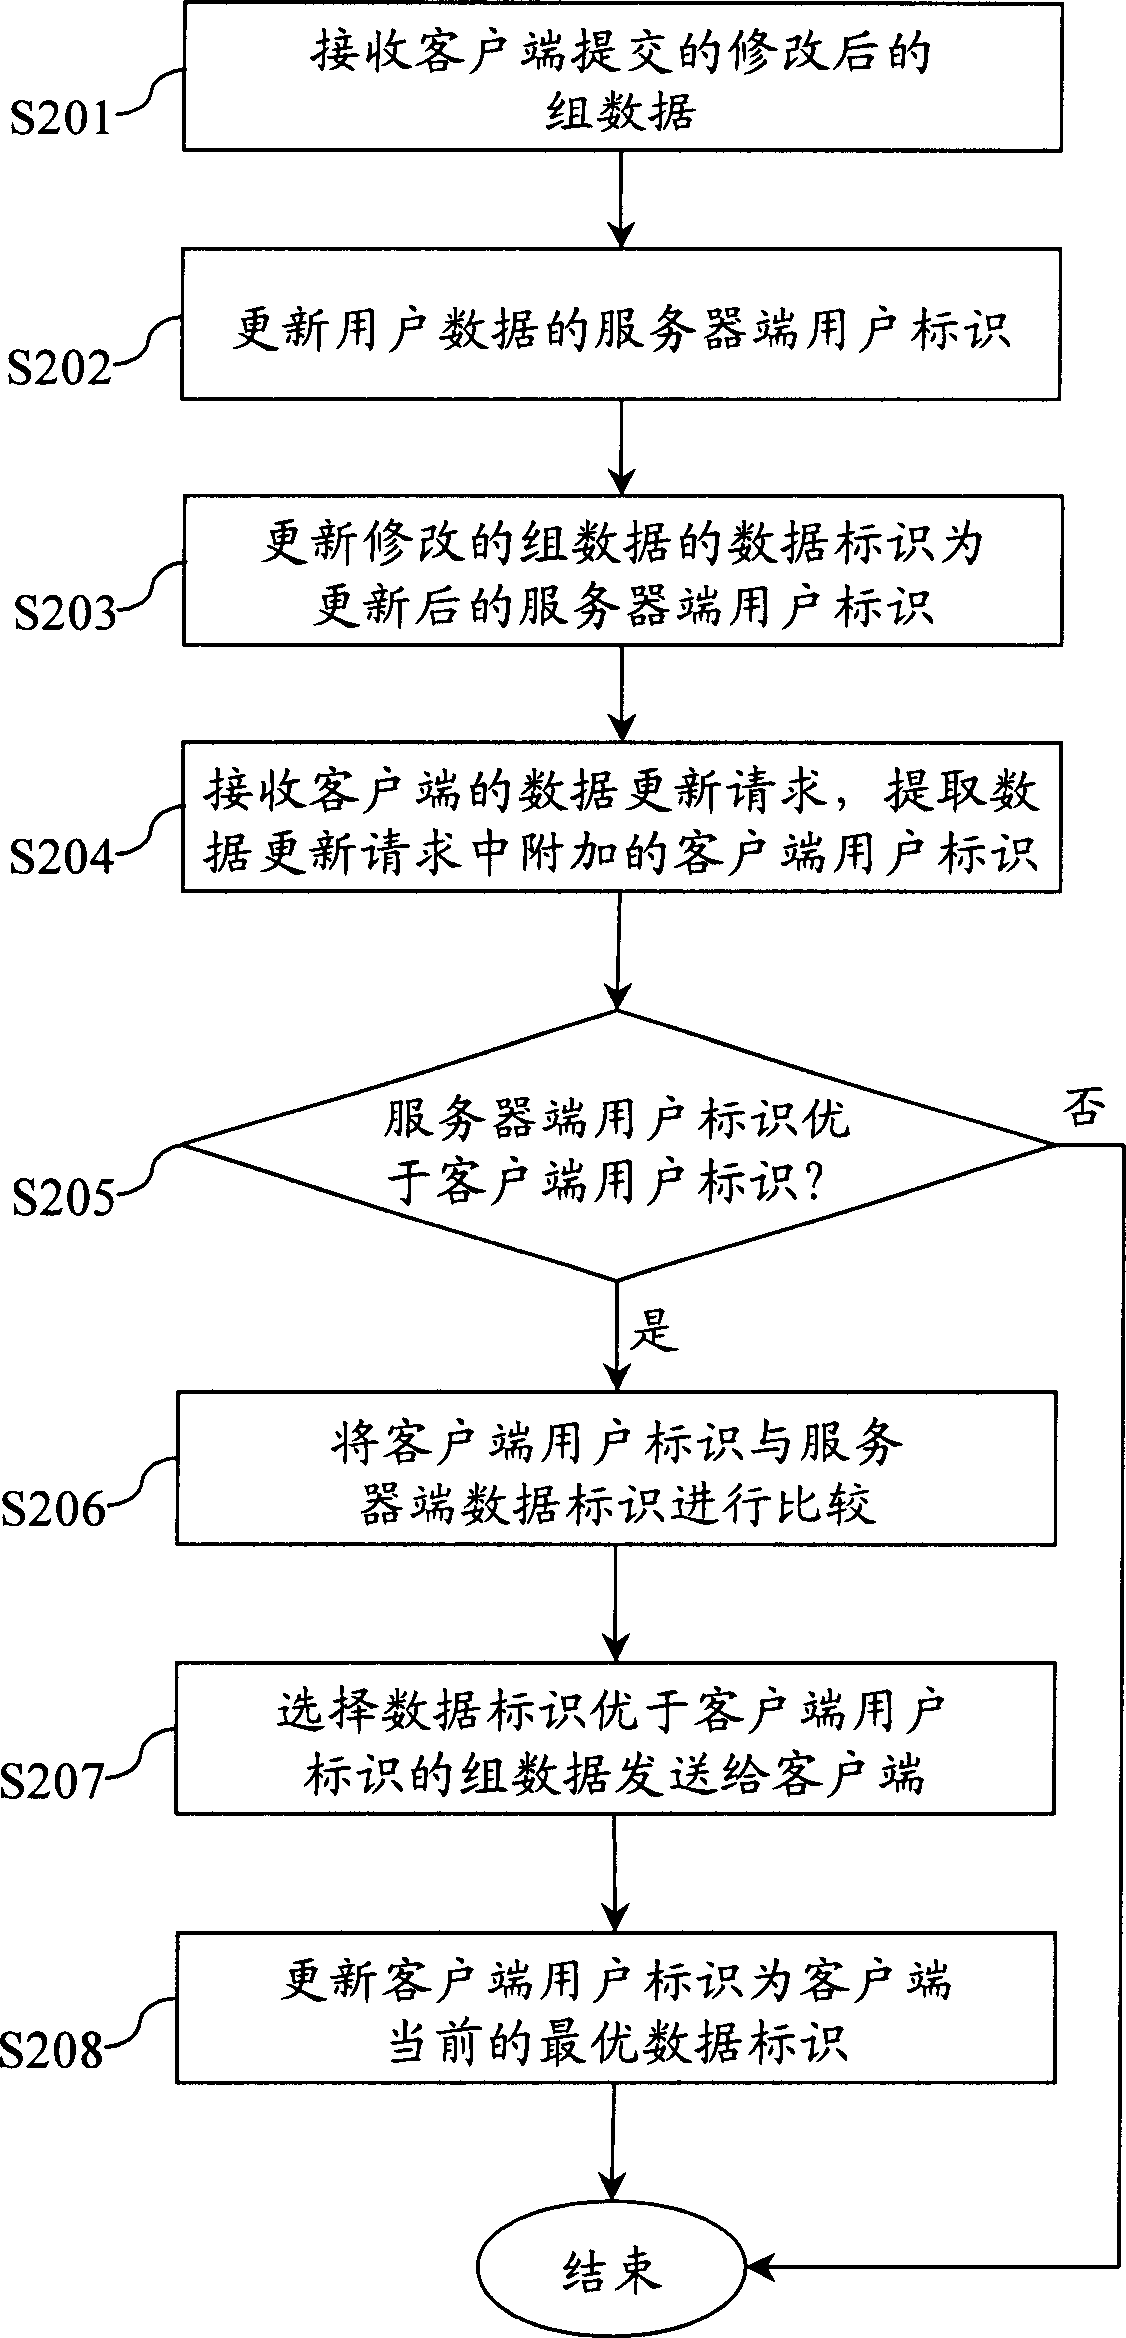 Method and system for user data transaction in communication system